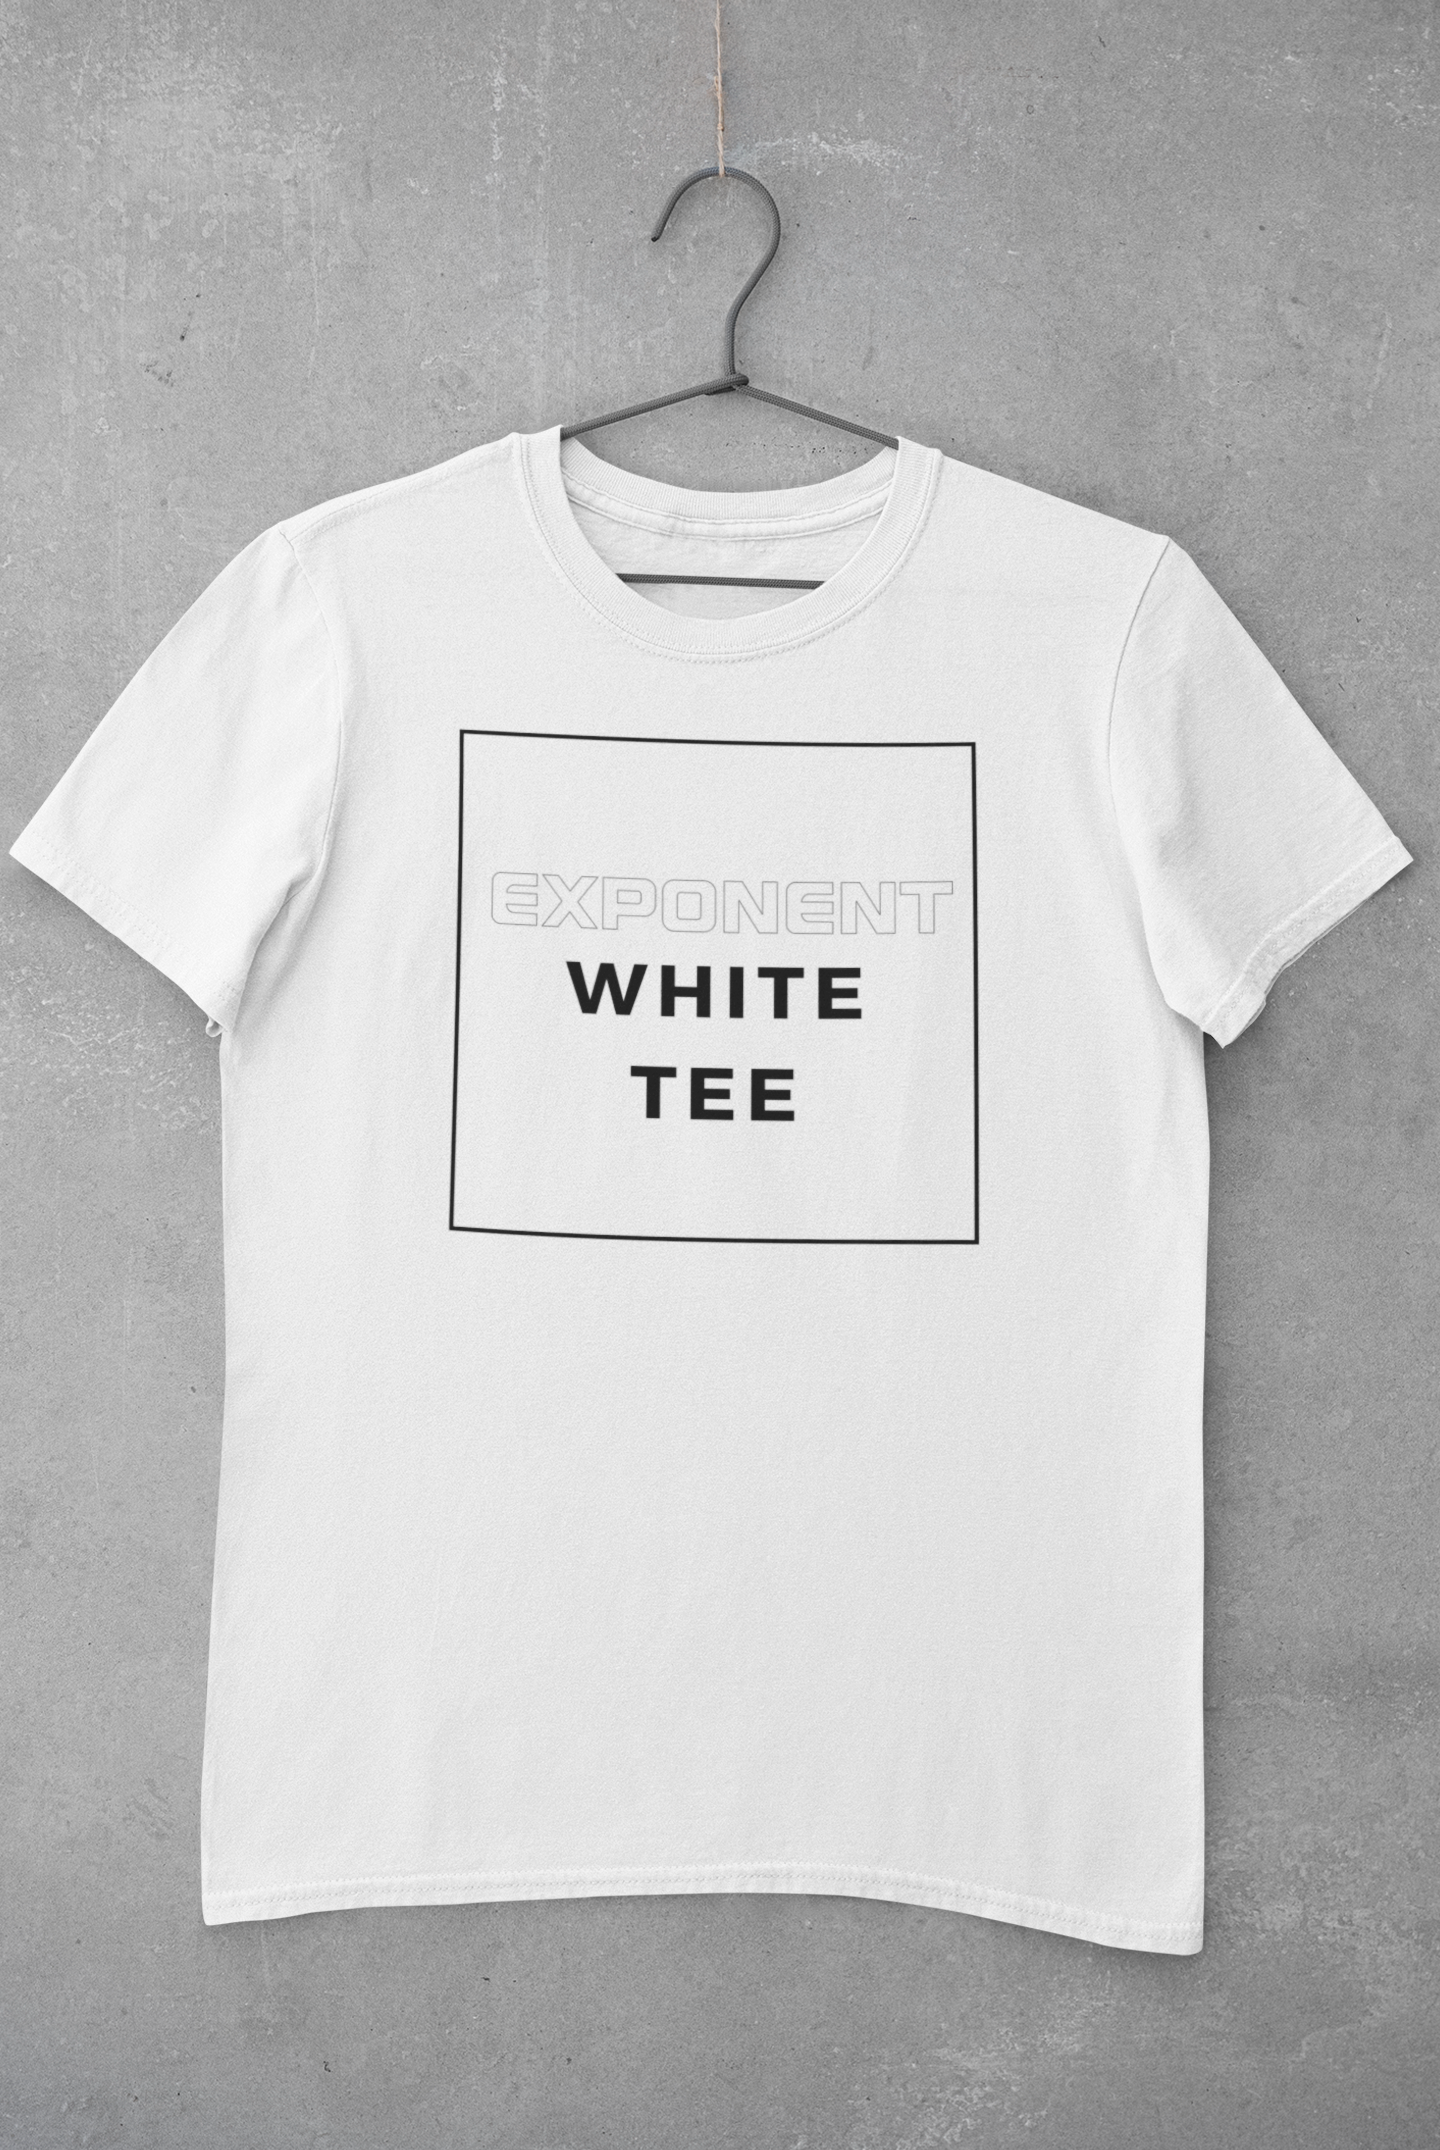 Exponent White Tee Square